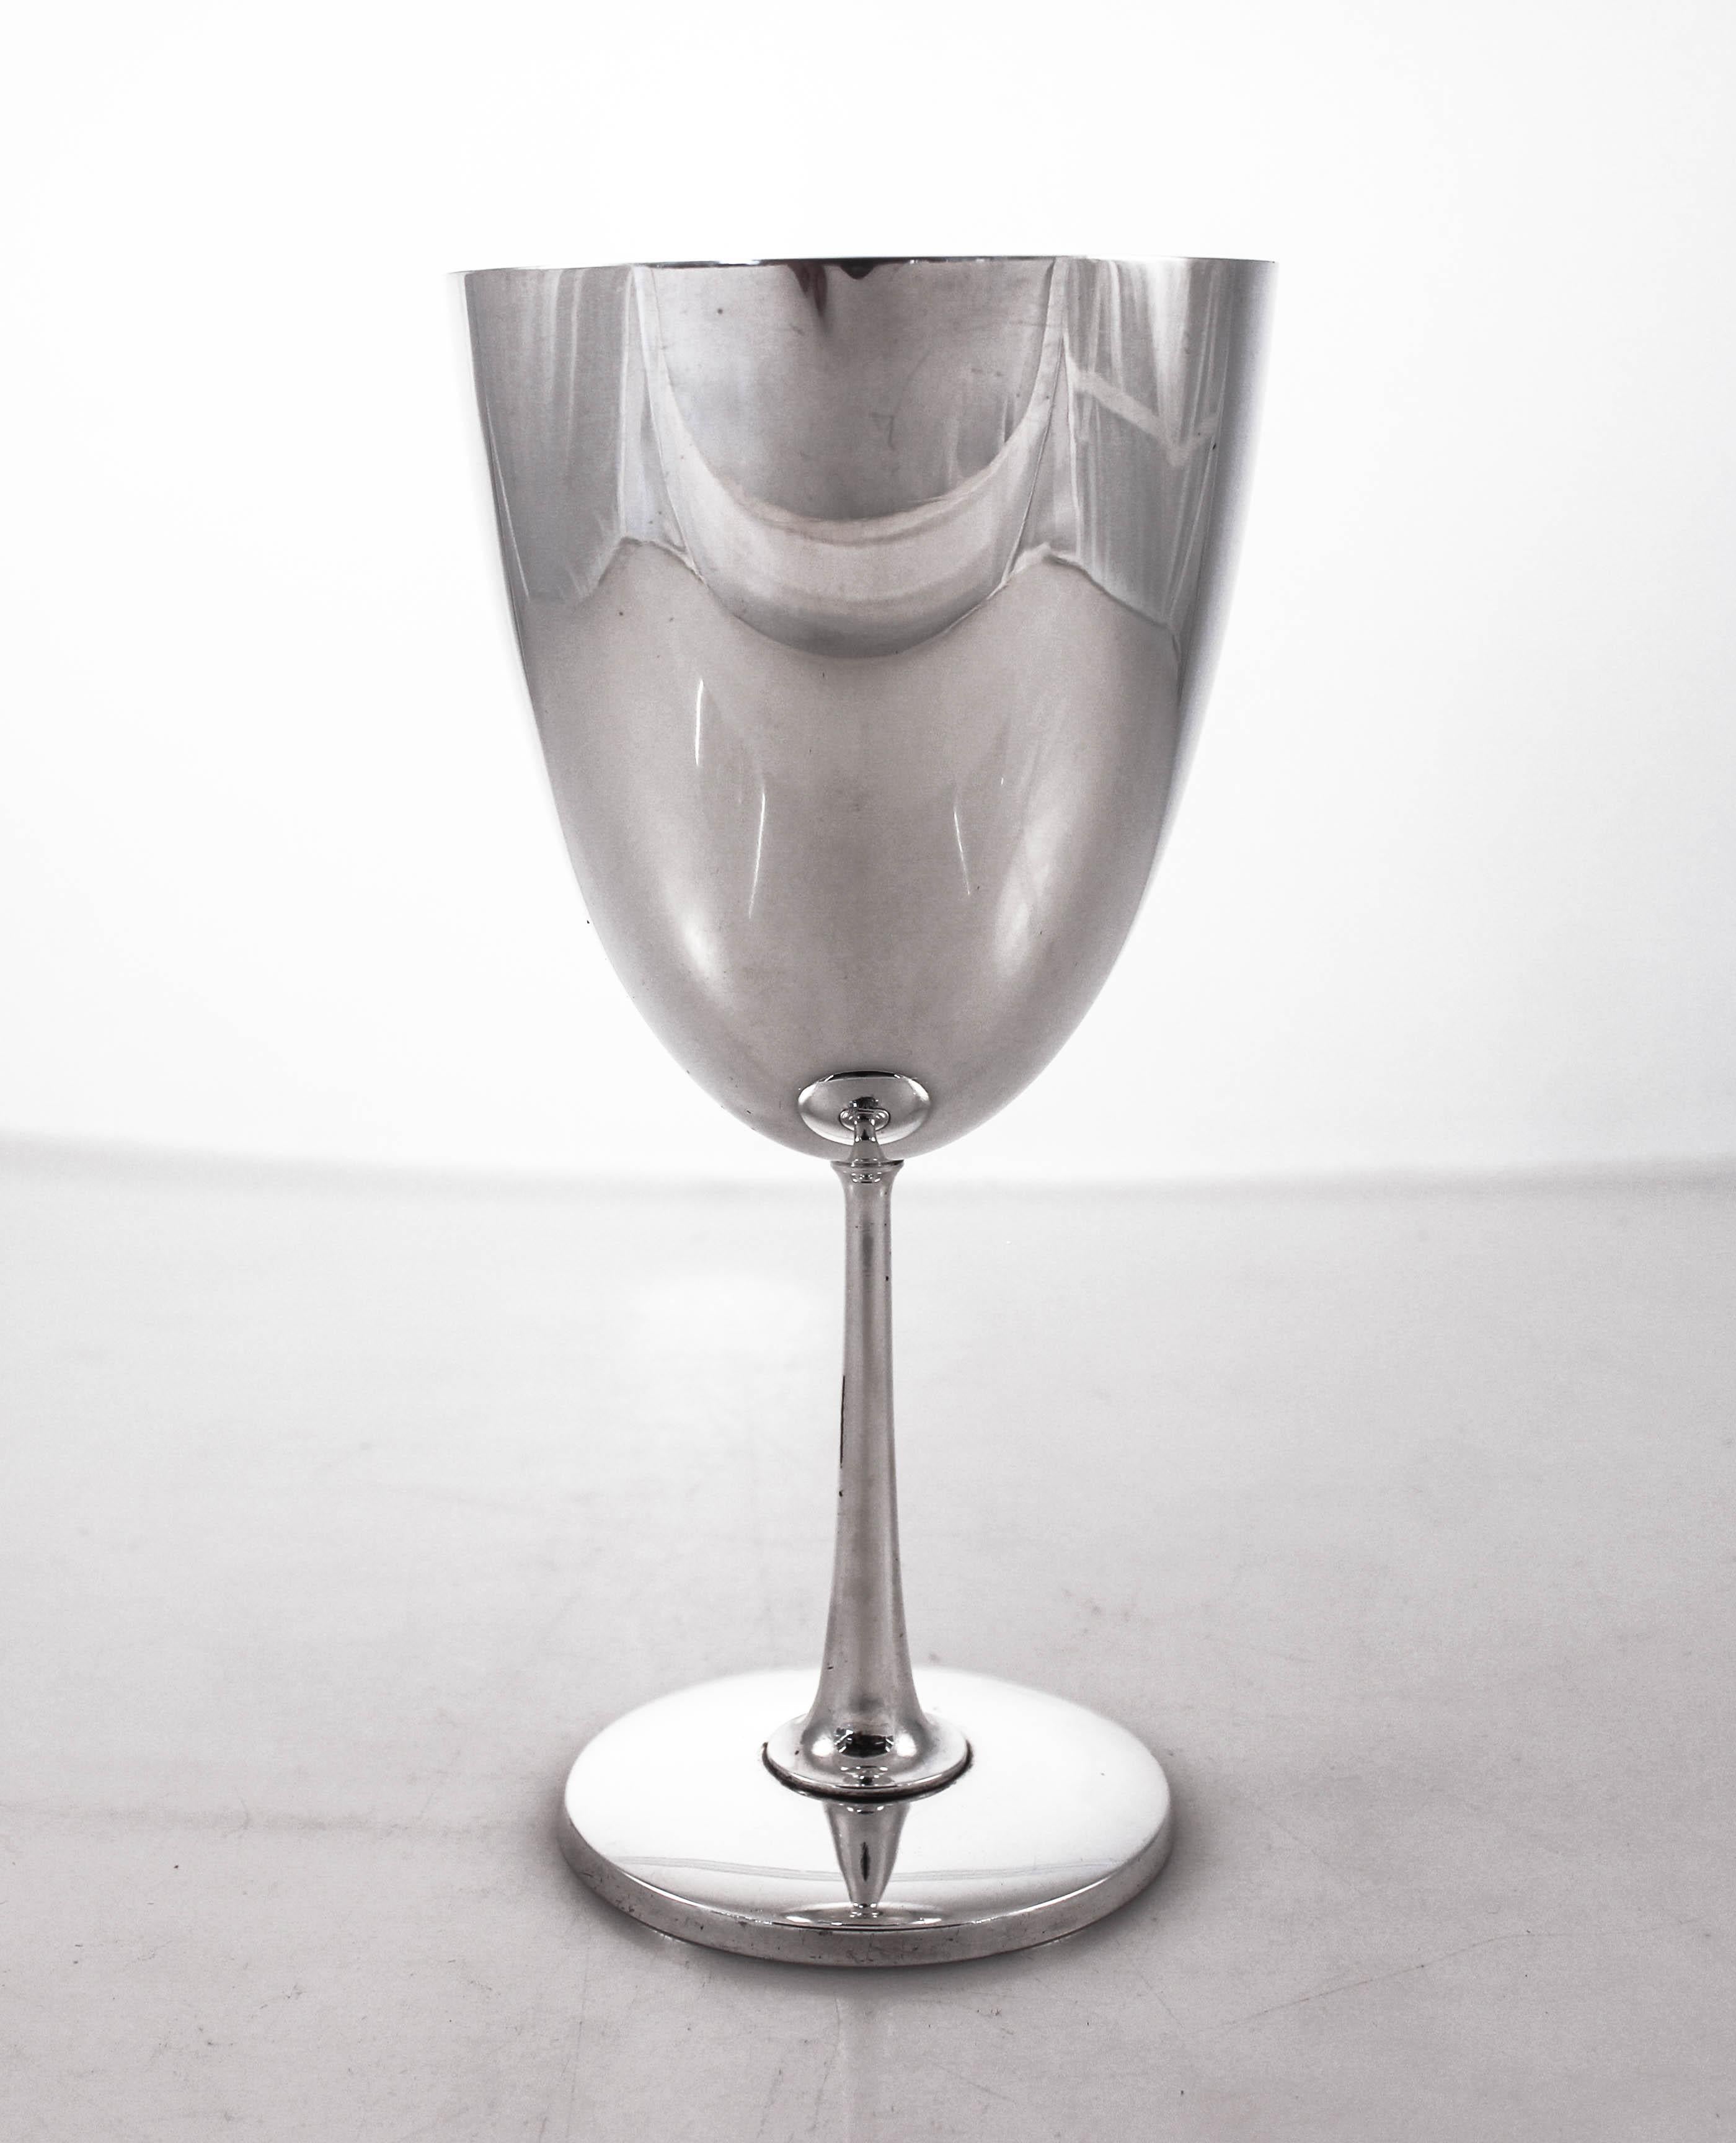 Sterling and Tiffany; two words that go well together. Here is a sterling silver midcentury goblet by the world renowned silver company, Tiffany. Straight lines and a simple understated shape make for a sophisticated and elegant piece. This piece